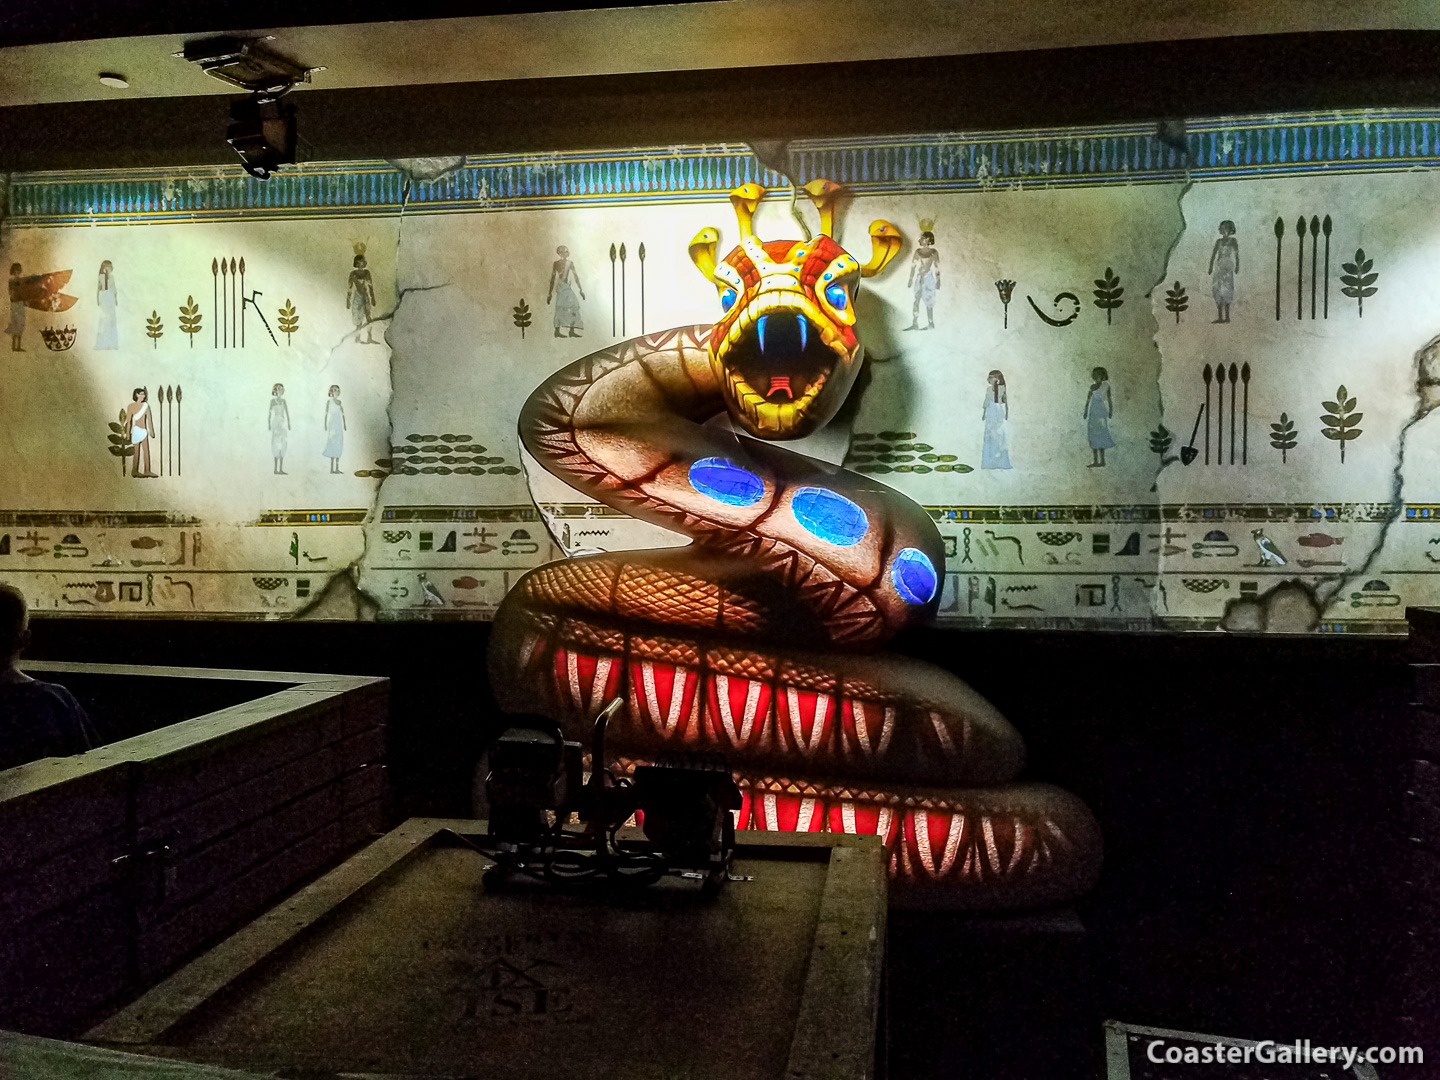 Moving hieroglyphics and a moving, magical snake in the Cobra's Curse pre-show